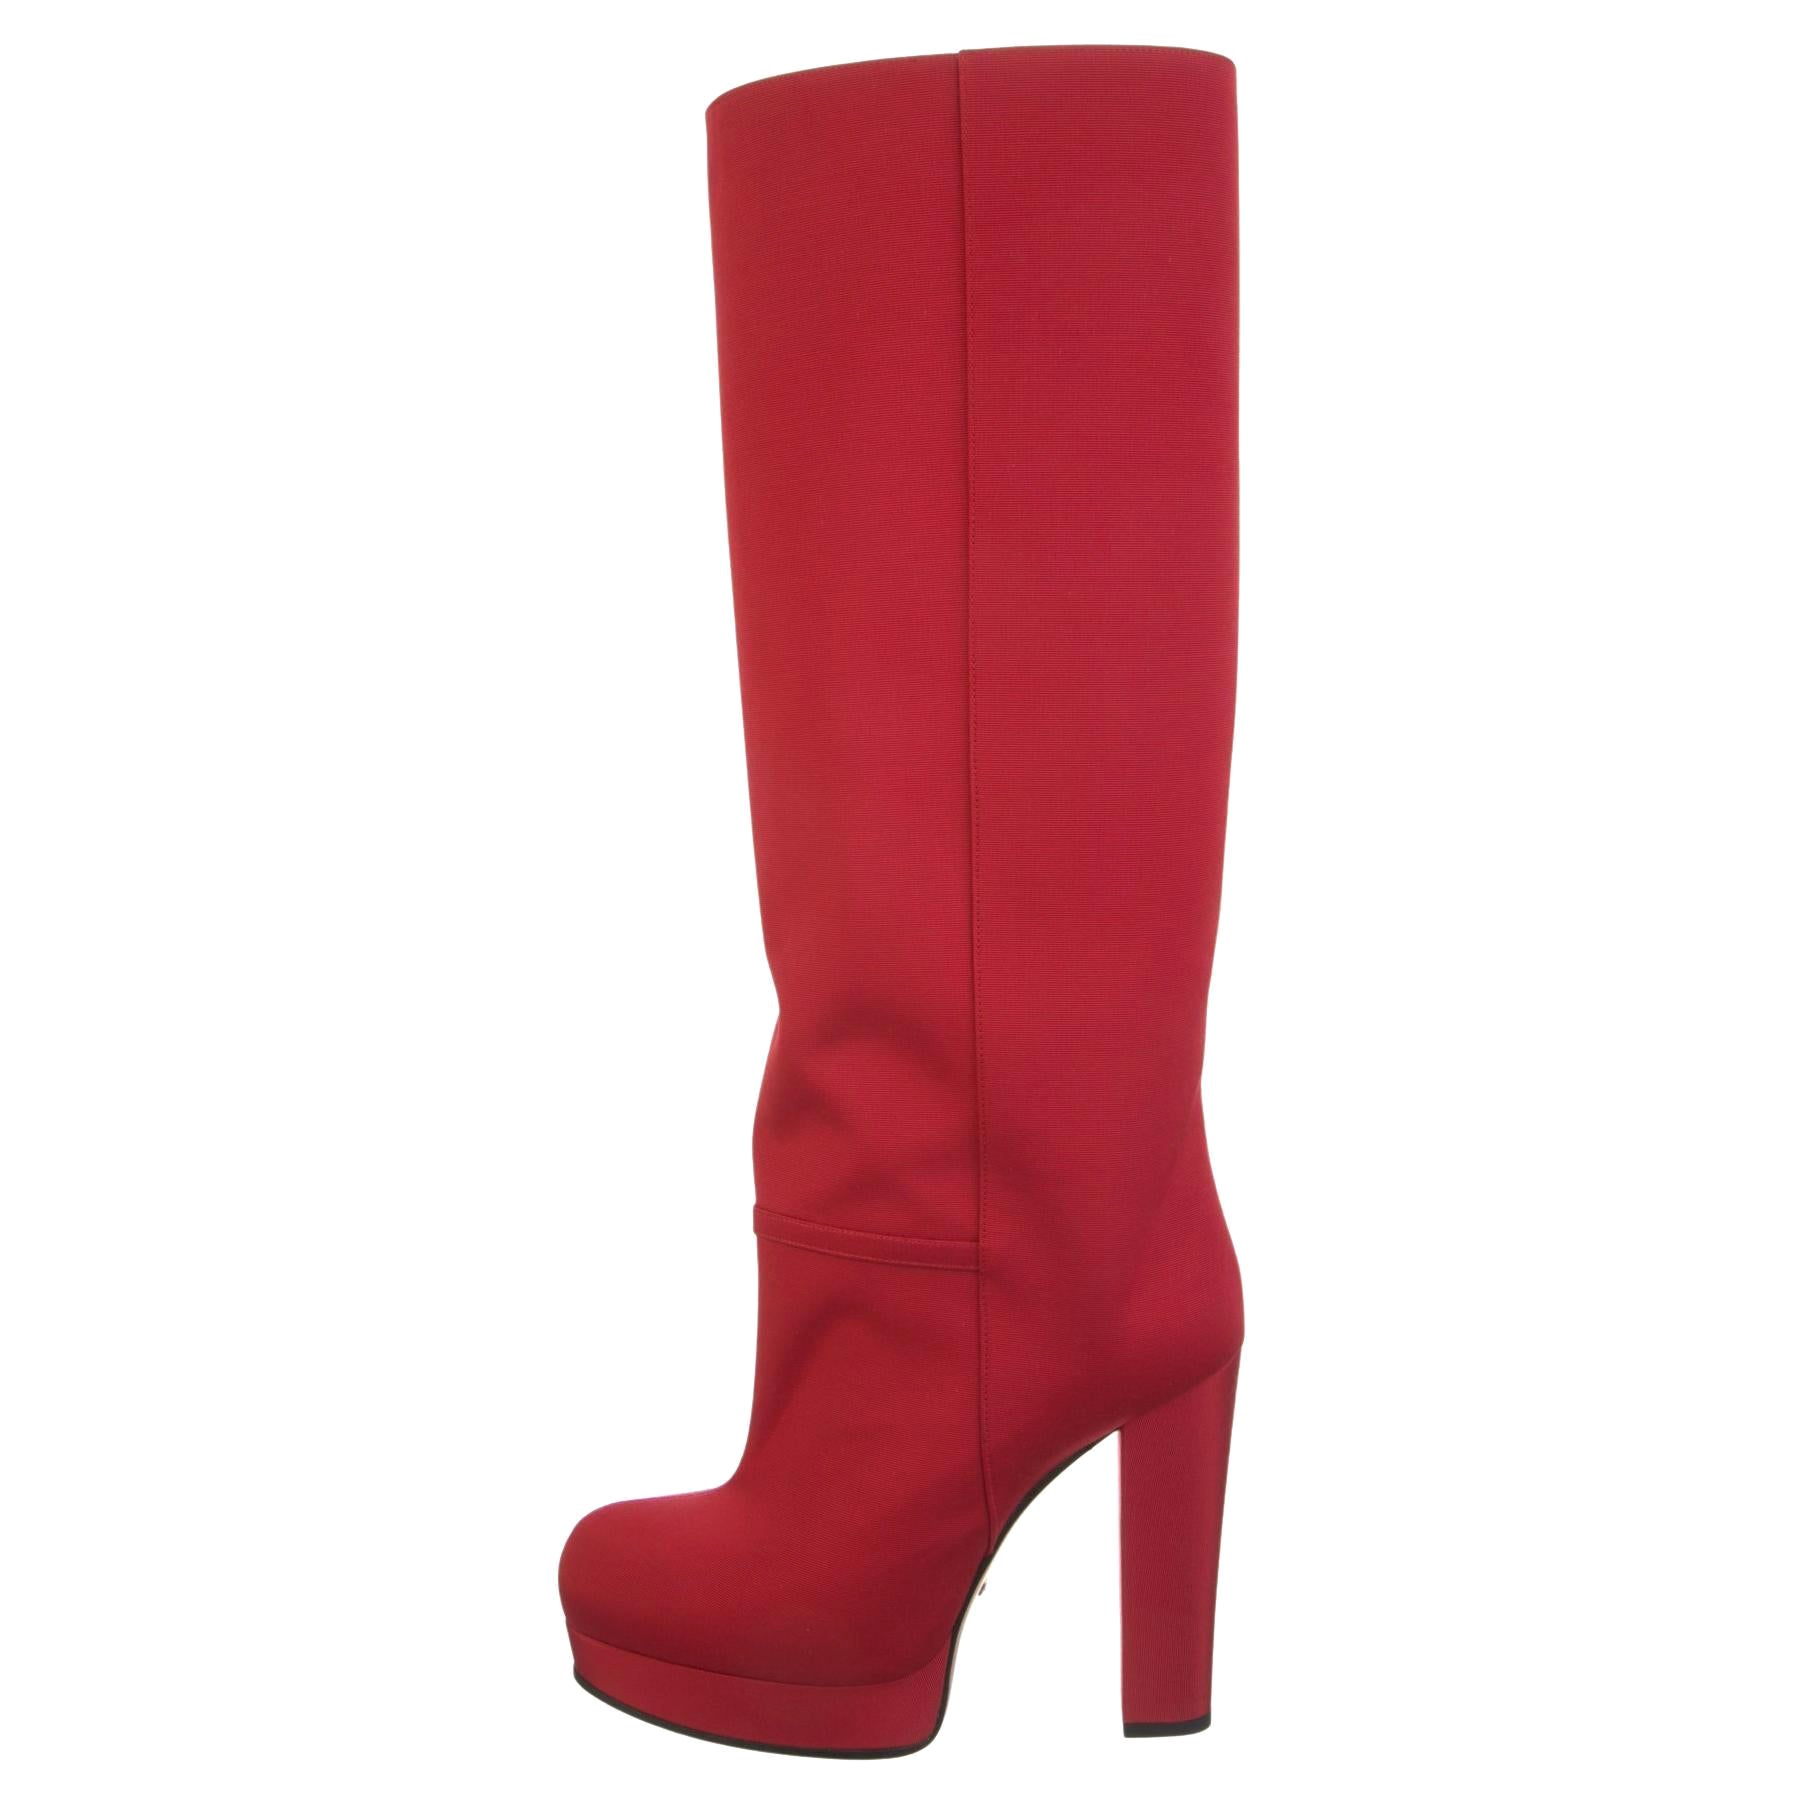 New With Box Gucci Fall 2019 Alessandro Michele Red Boots Sz 38.5